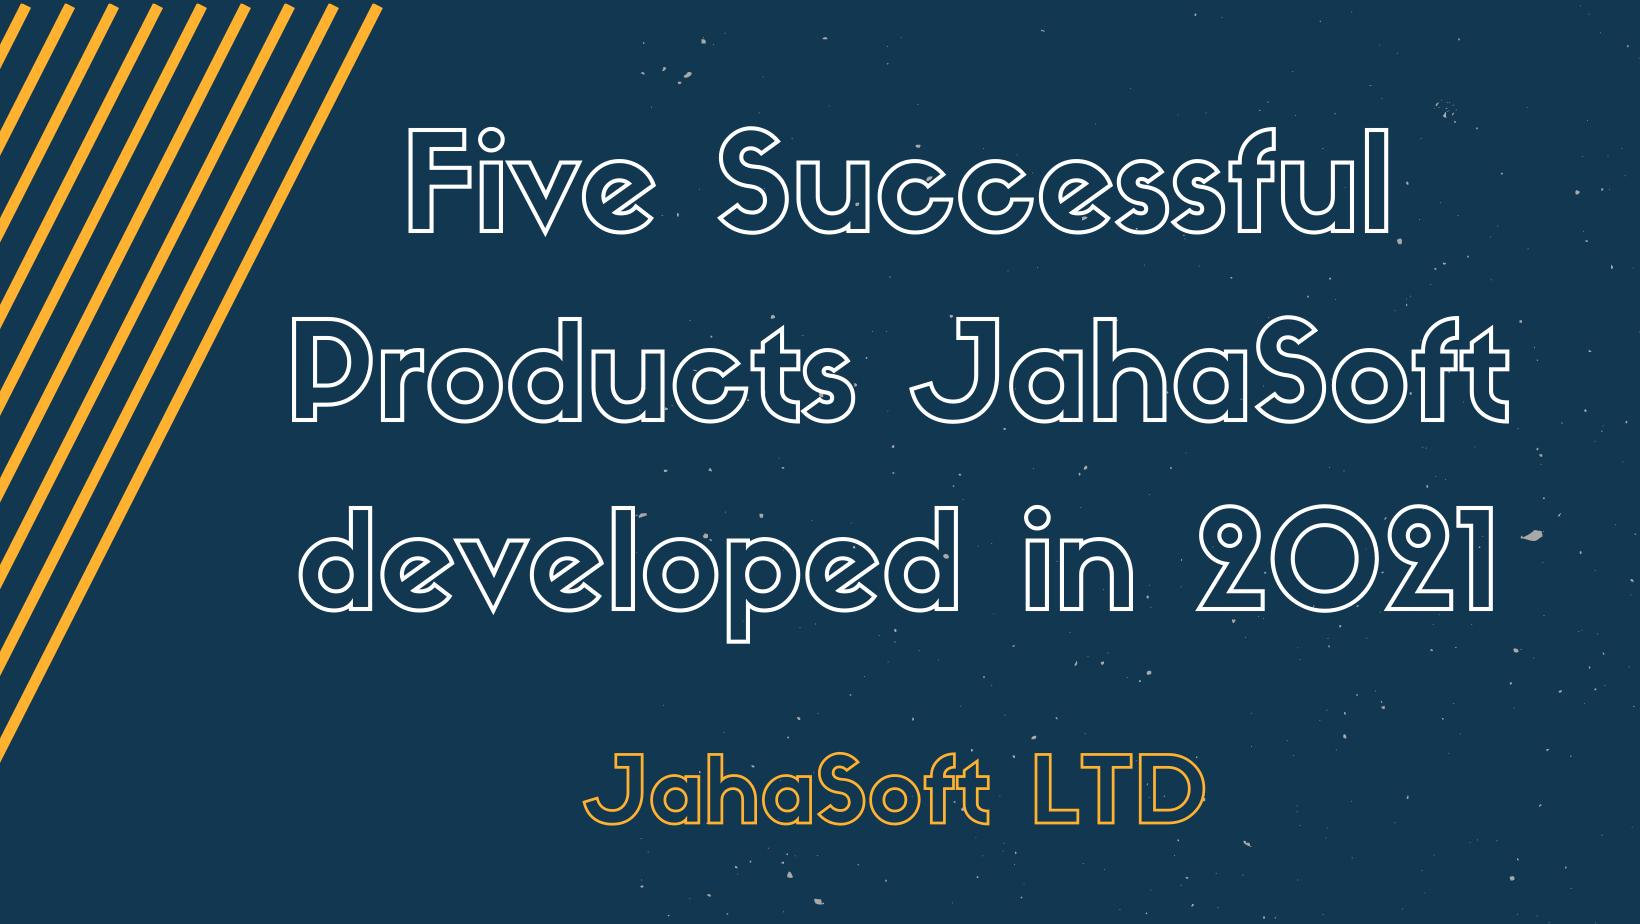 List of JahaSoft SAAS Products Developed in 2021